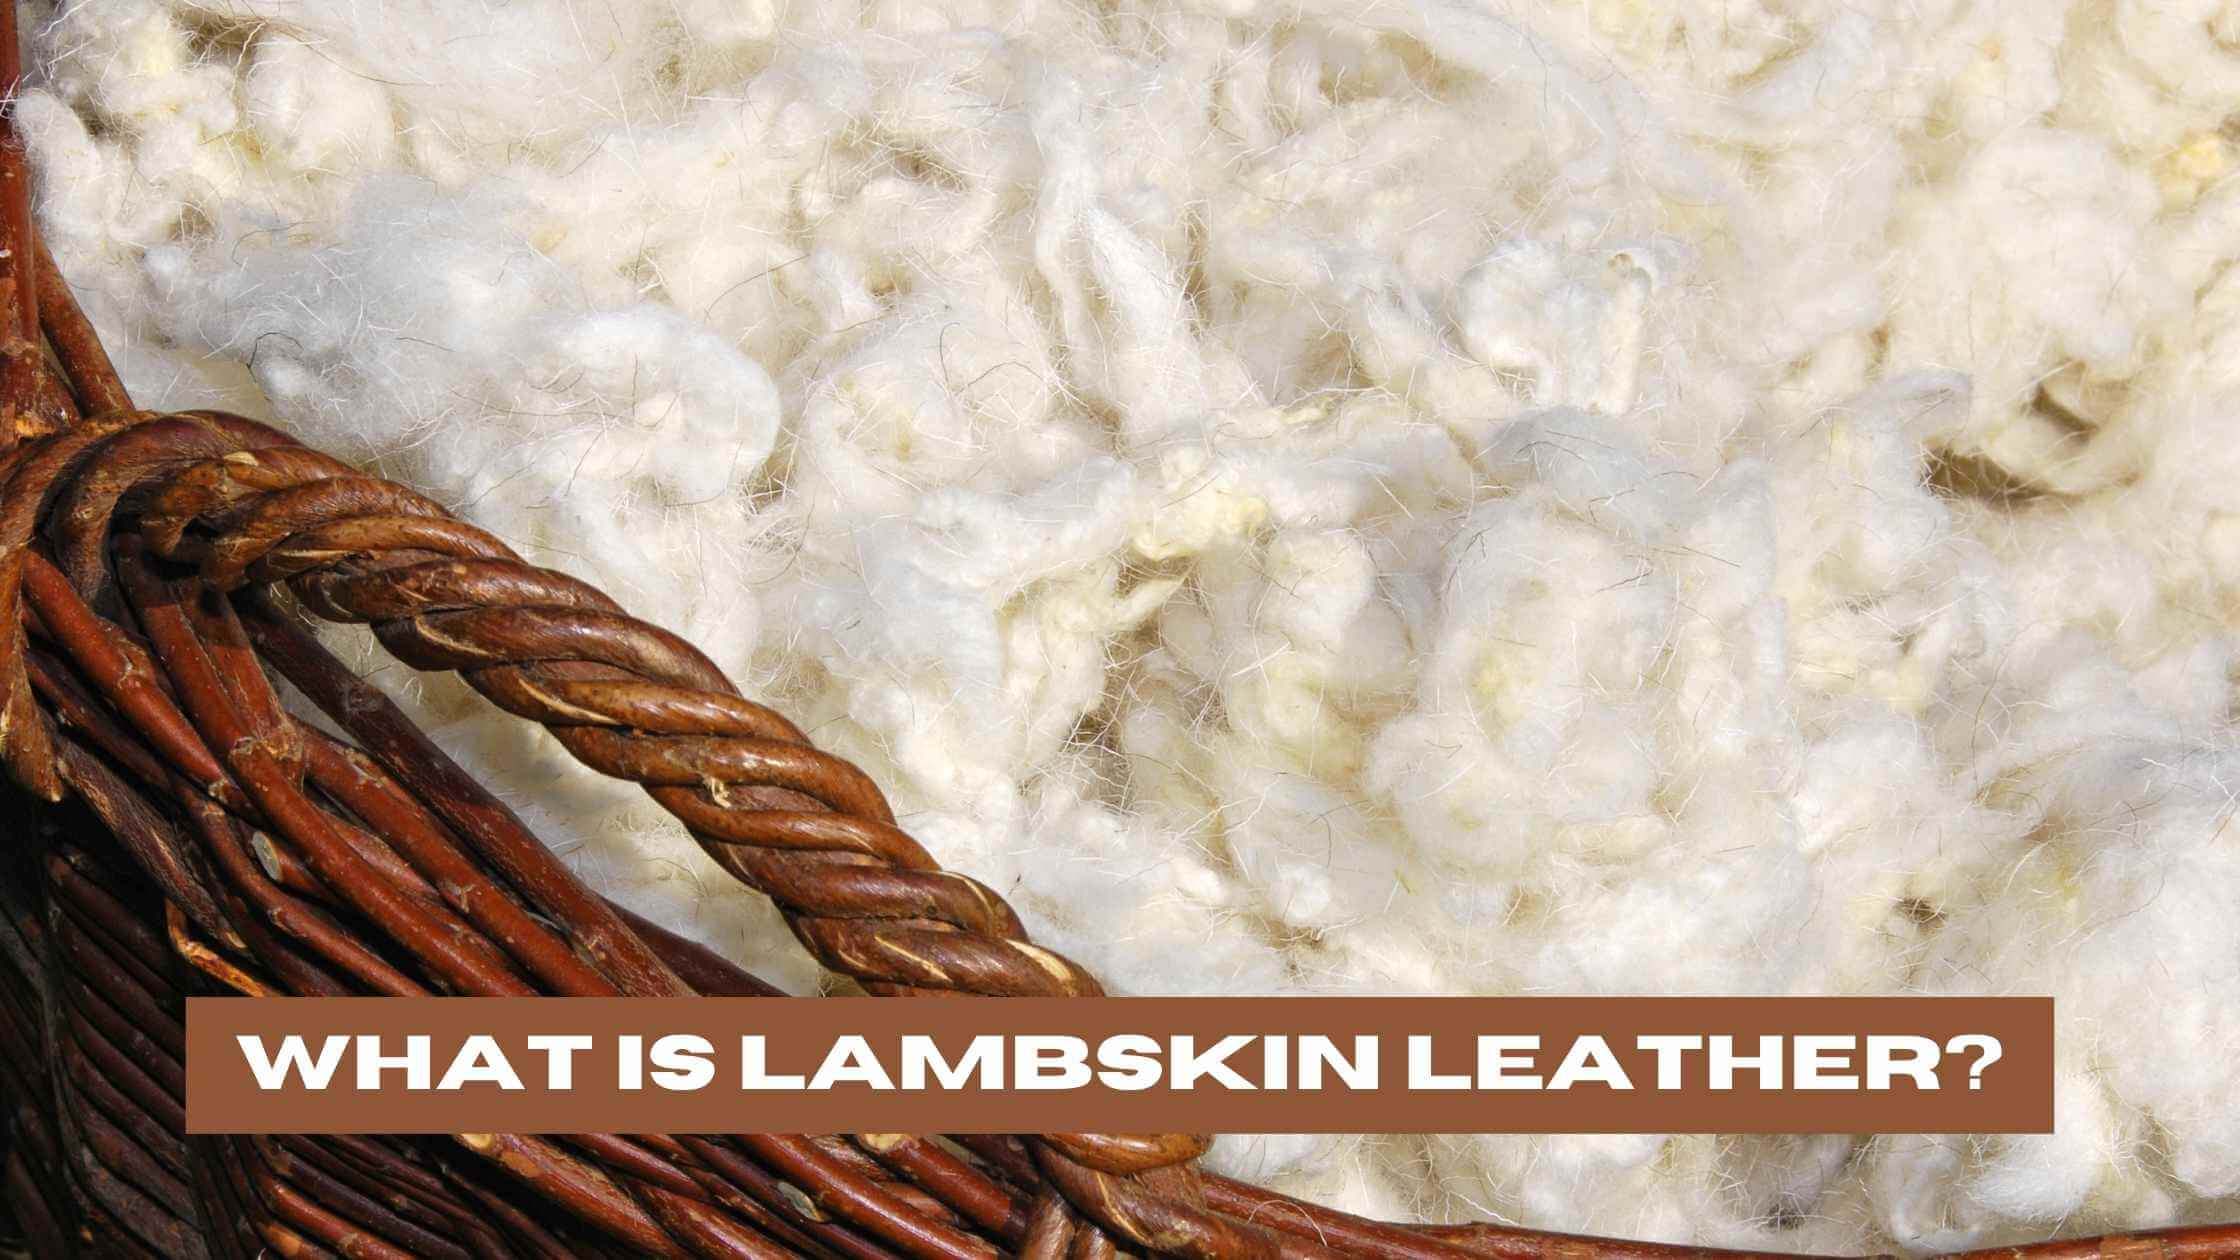 What is Lambskin Leather